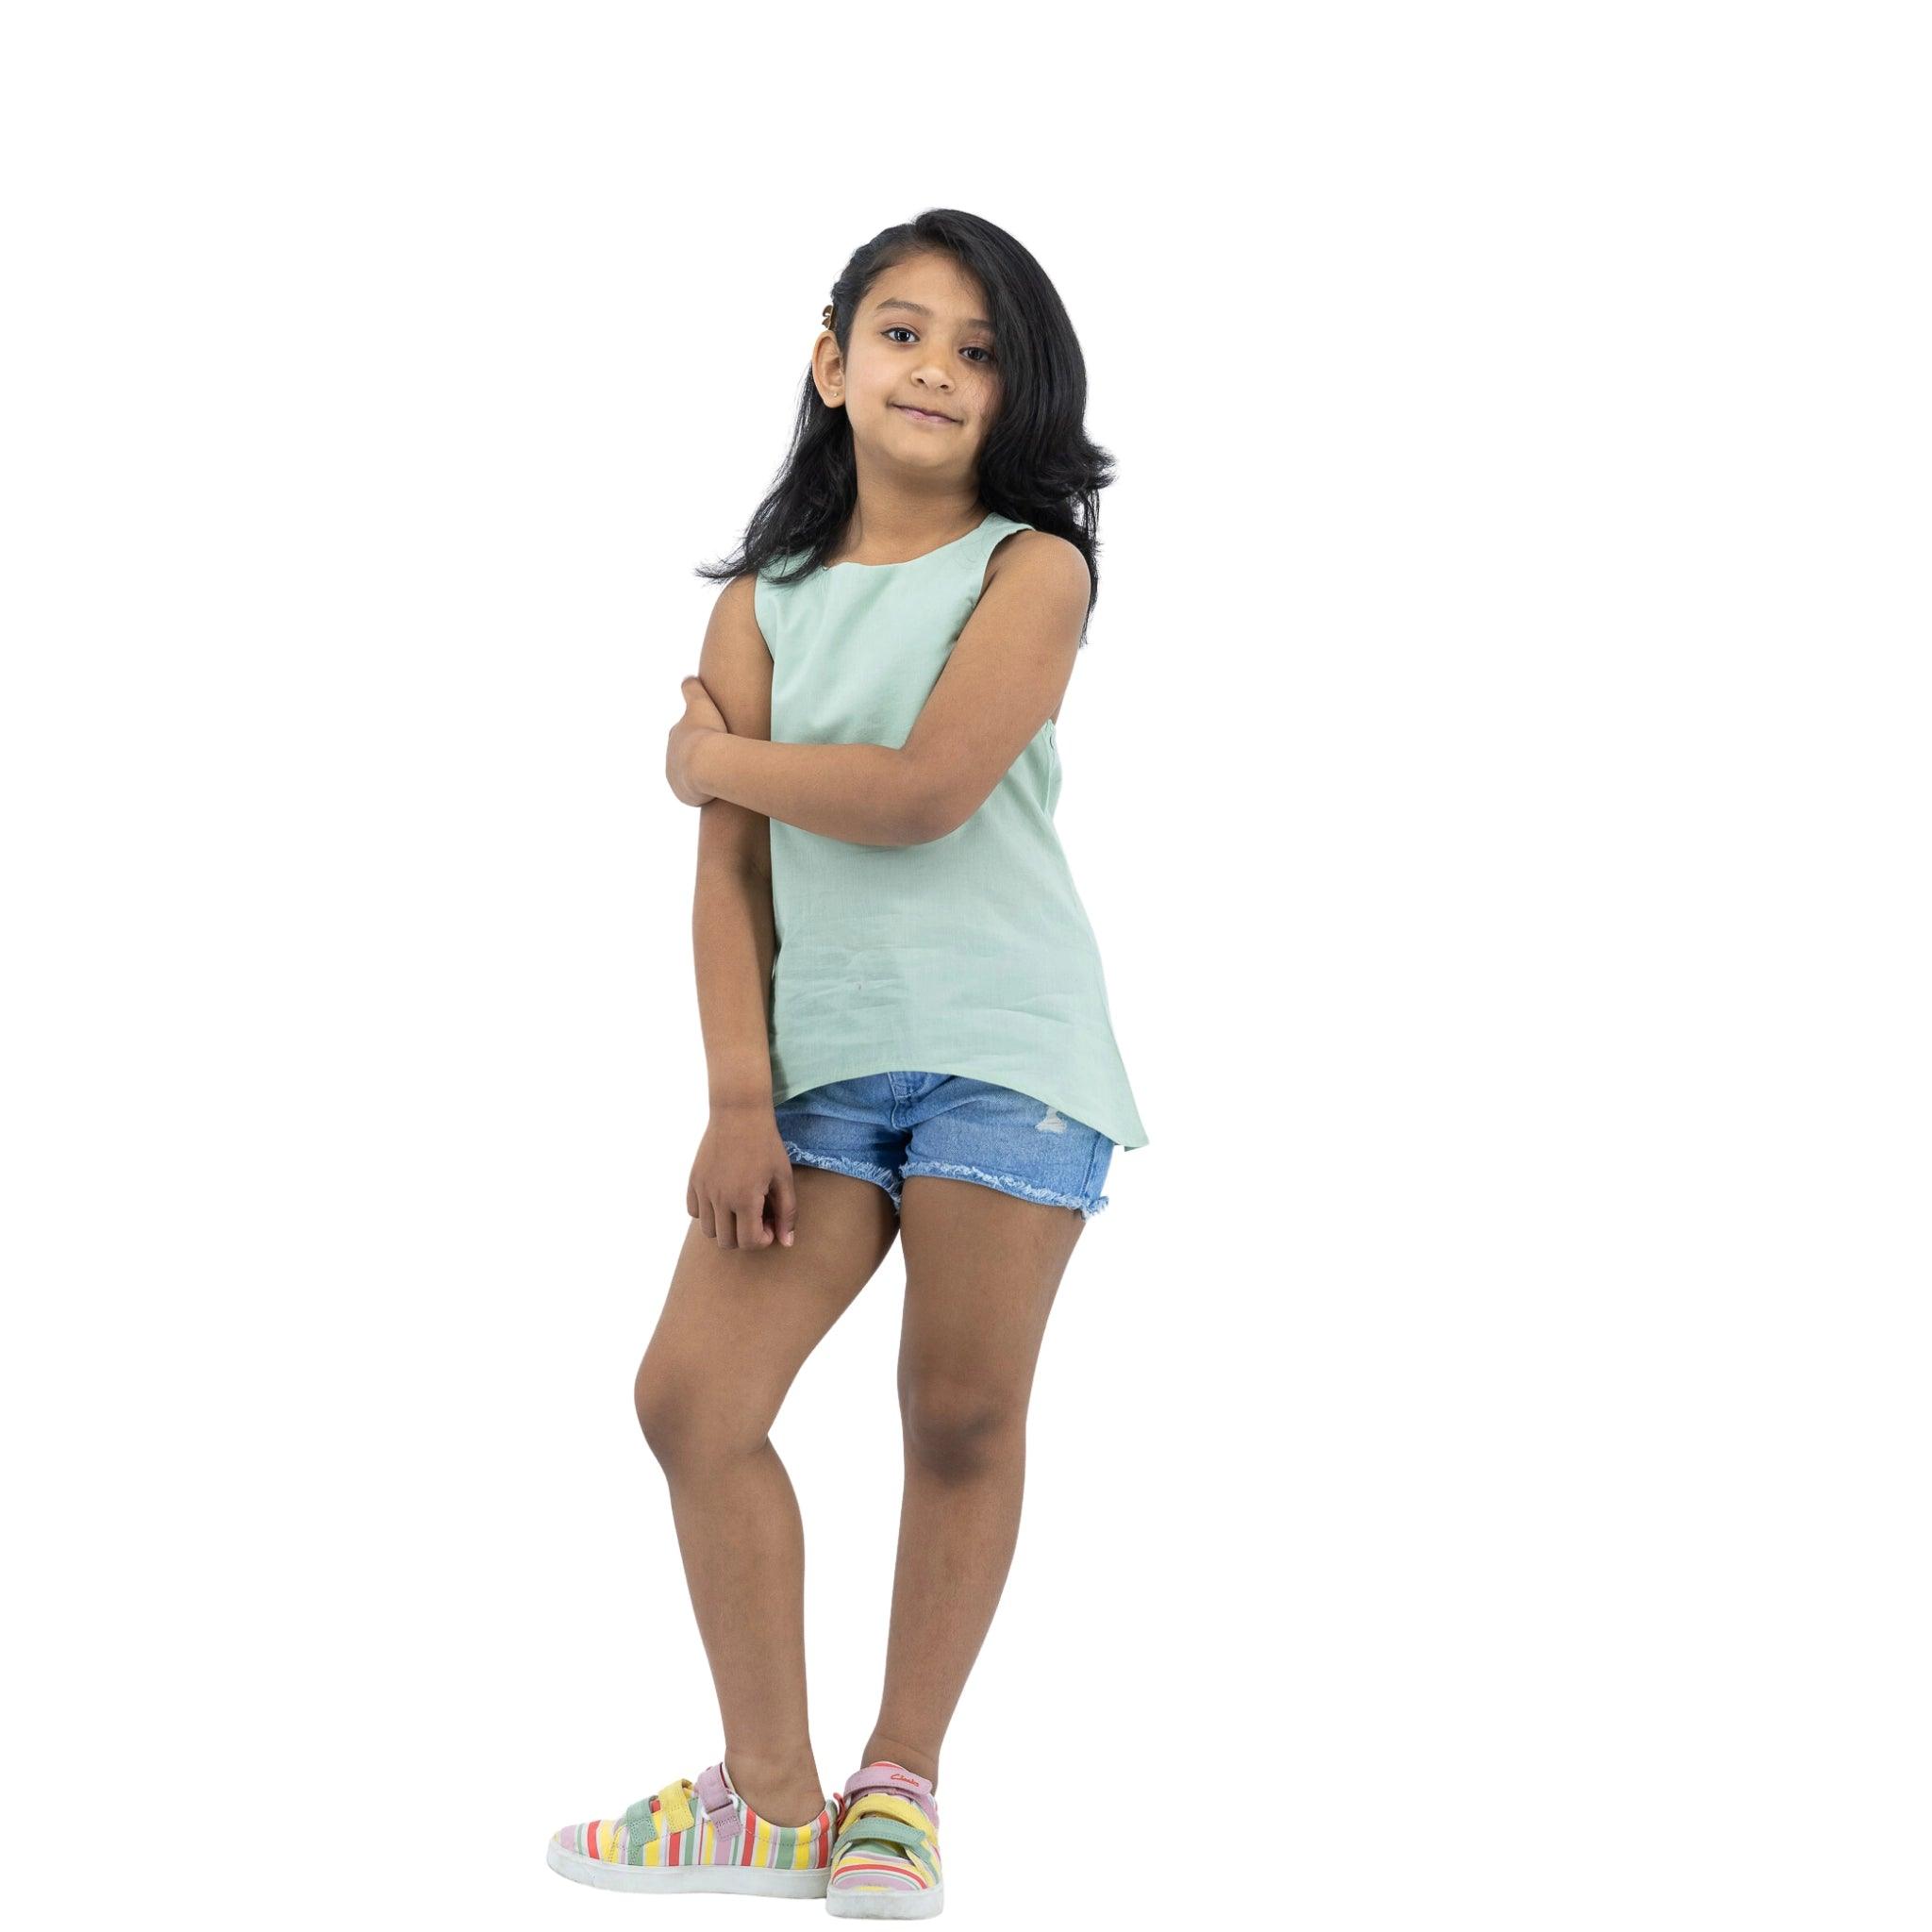 Young girl standing with arms crossed, wearing a Karee Smoke Green Cotton Bib Neck Top for kids, denim shorts, and colorful sneakers, isolated on a white background.